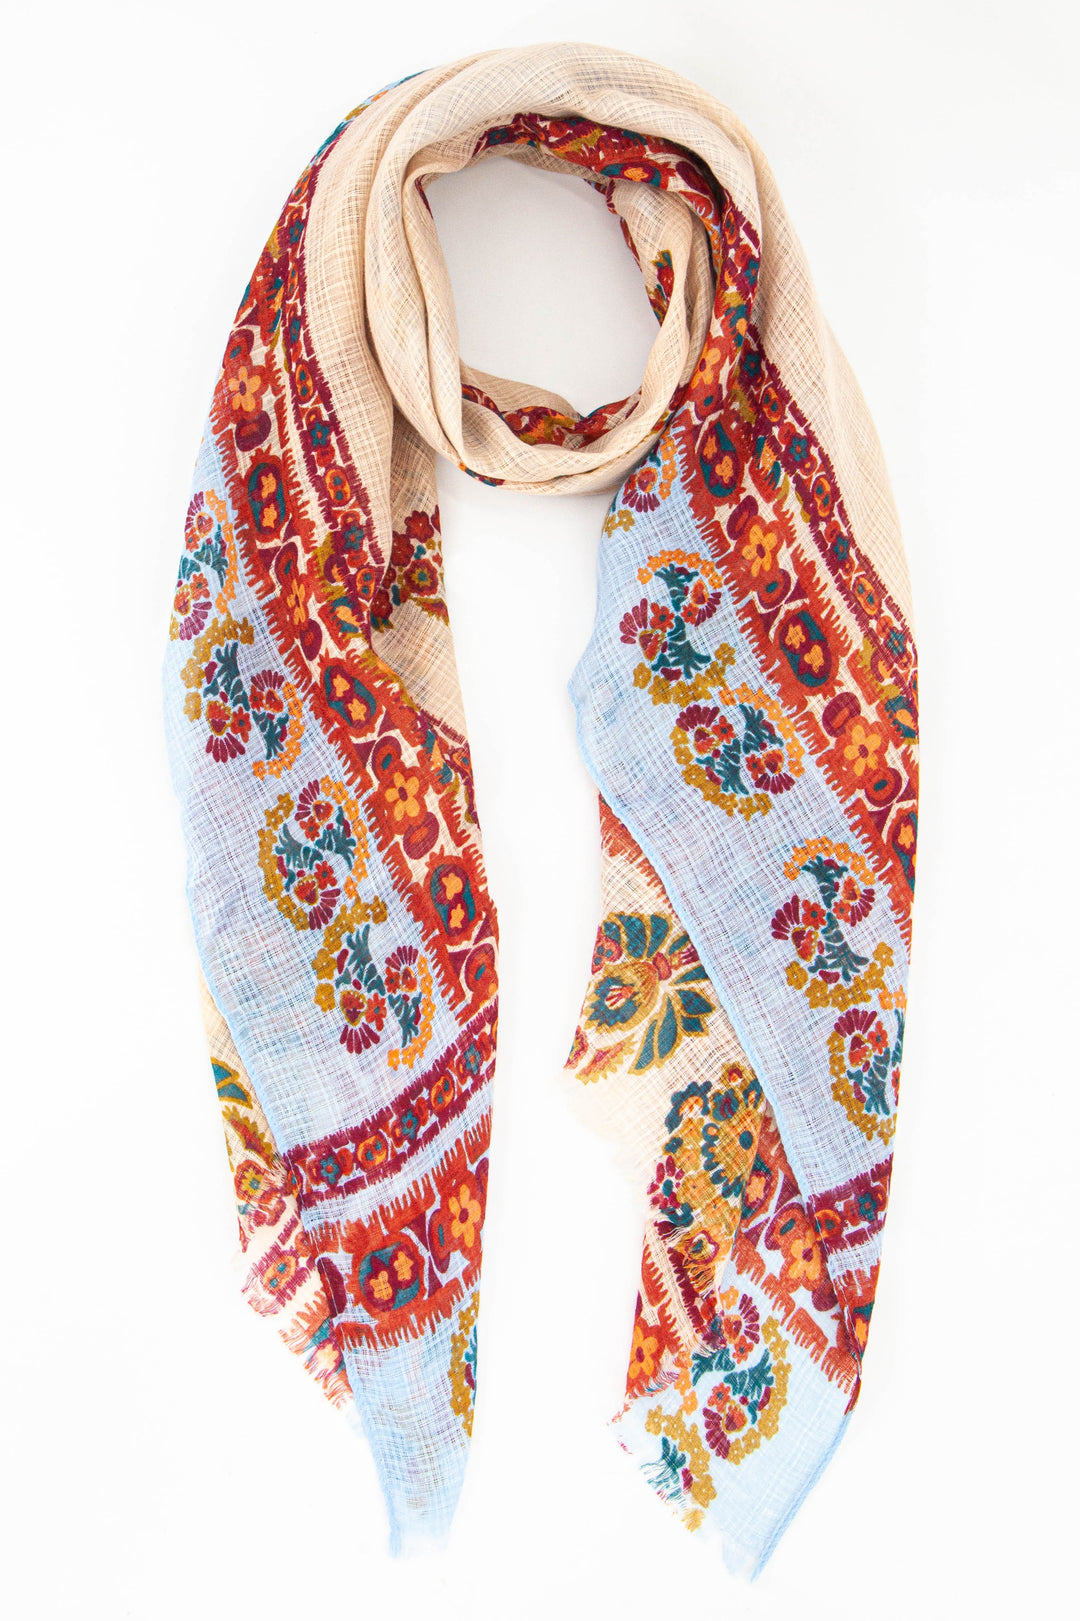 a vintage floral and paisley print lightweight summer scarf in cream and orange